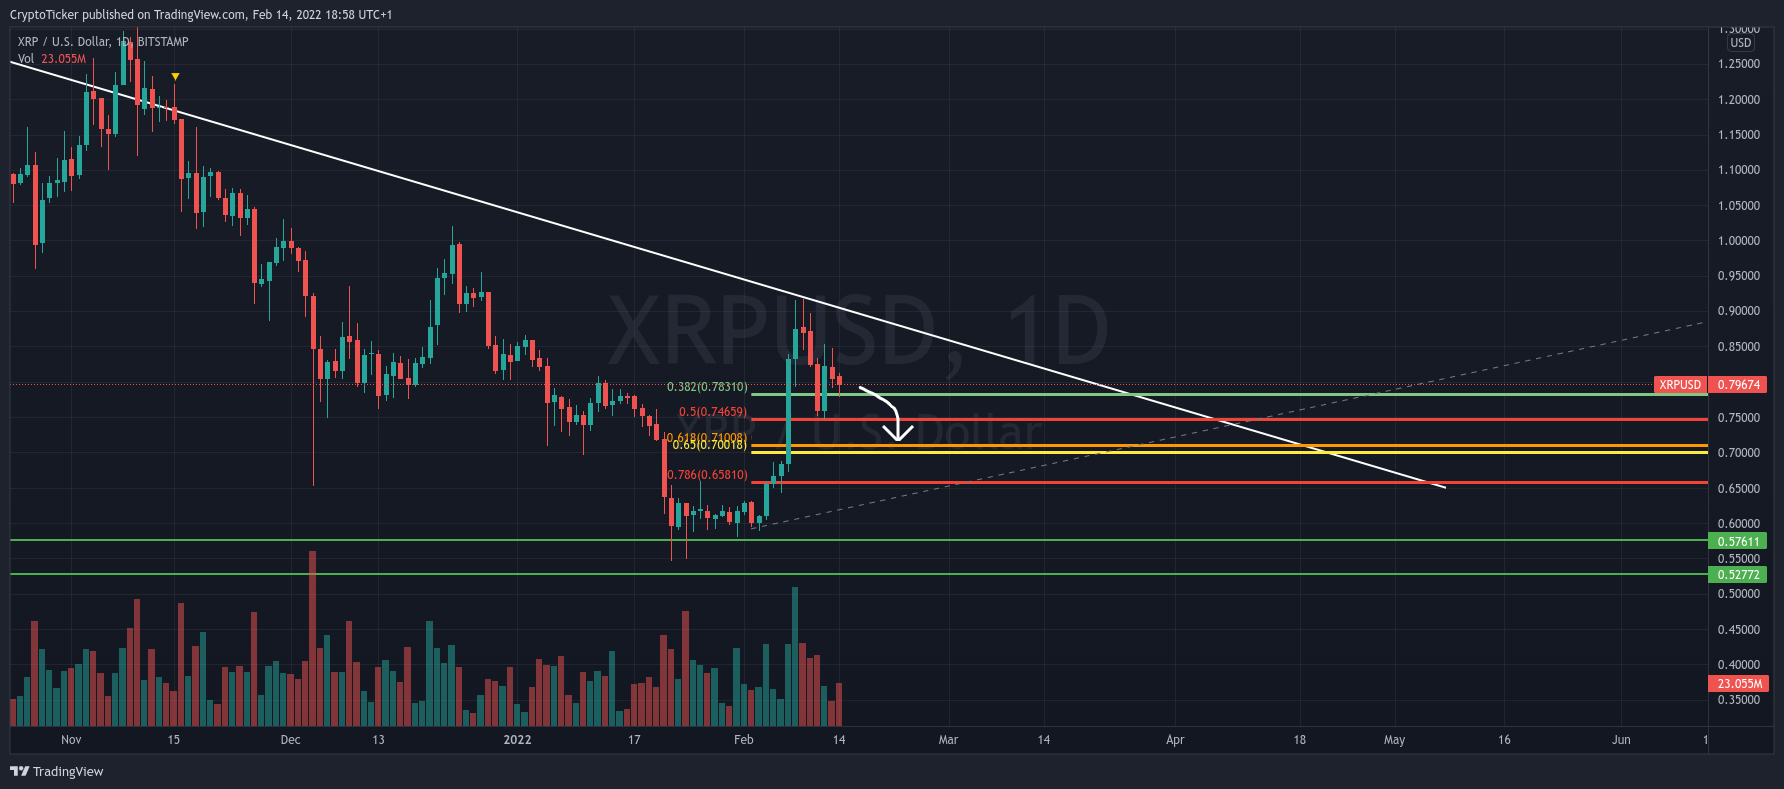 XRP/USD 1-day chart showing the potential retracement of XRP